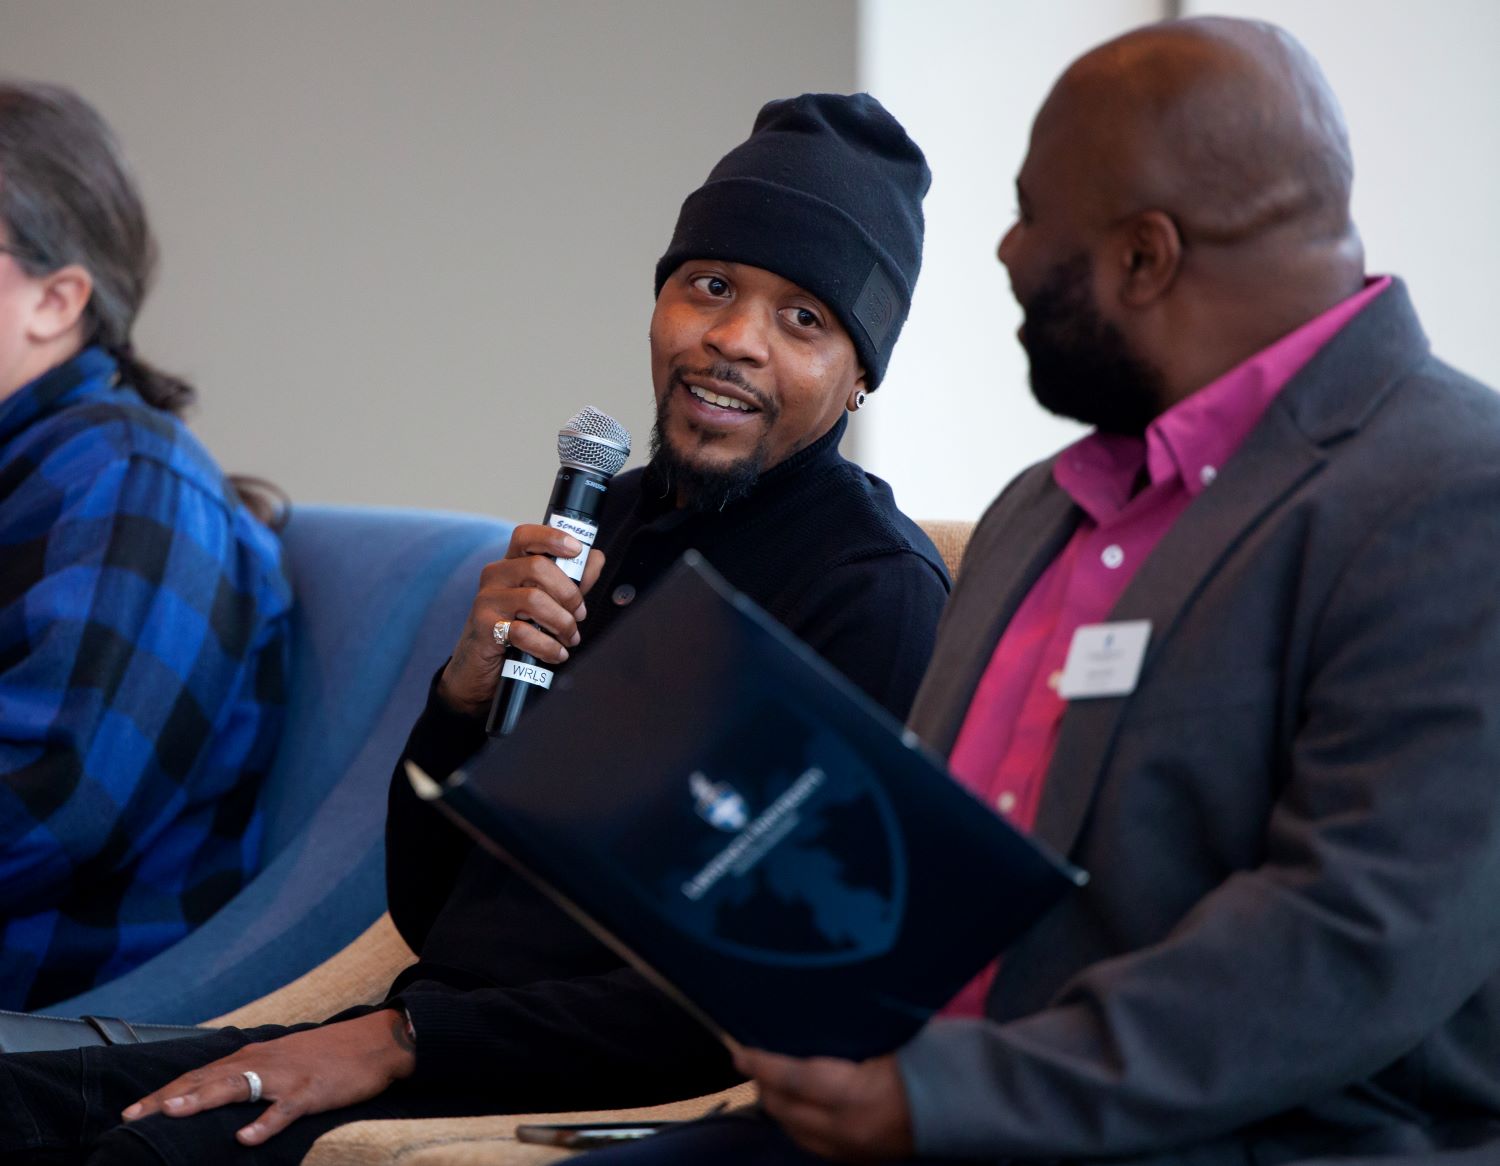 Cainan Davenport, co-owner of Taperz Barber Shop, speaks during the Transformational Leaders of Color Breakfast: There is No Gain without Struggle, held in Warch Campus Center as part of the MLK Day celebration. Jesus Smith looks on.